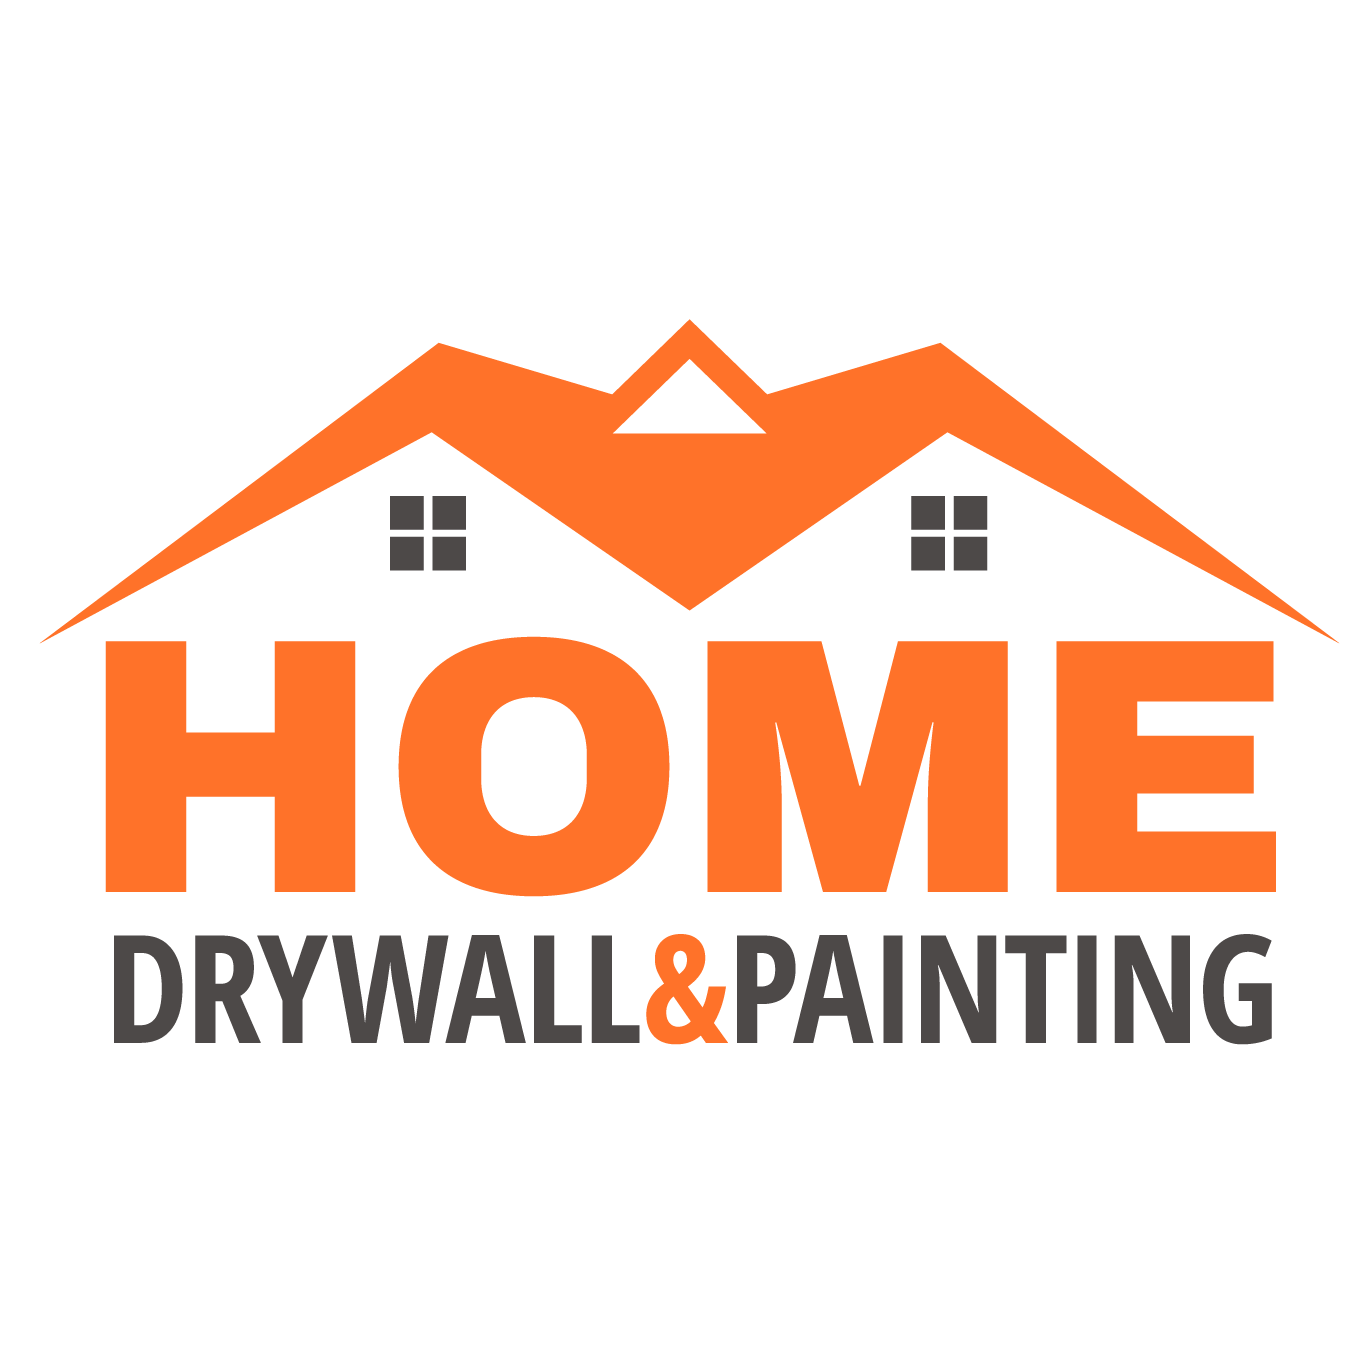 Home Drywall and Painting - Minneapolis, MN 55418 - (612)816-5333 | ShowMeLocal.com